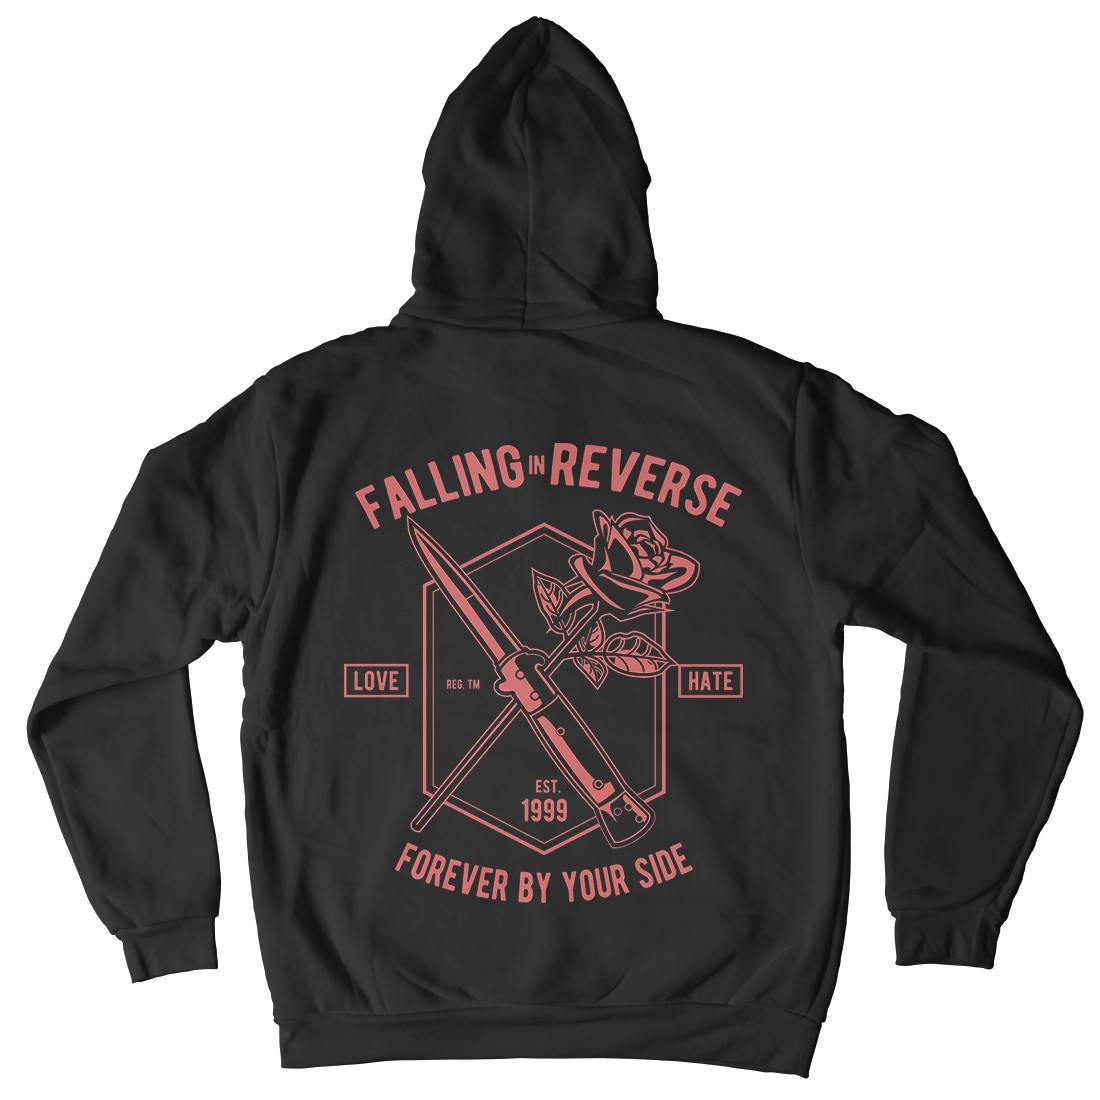 Falling In Reverse Mens Hoodie With Pocket Warriors A050